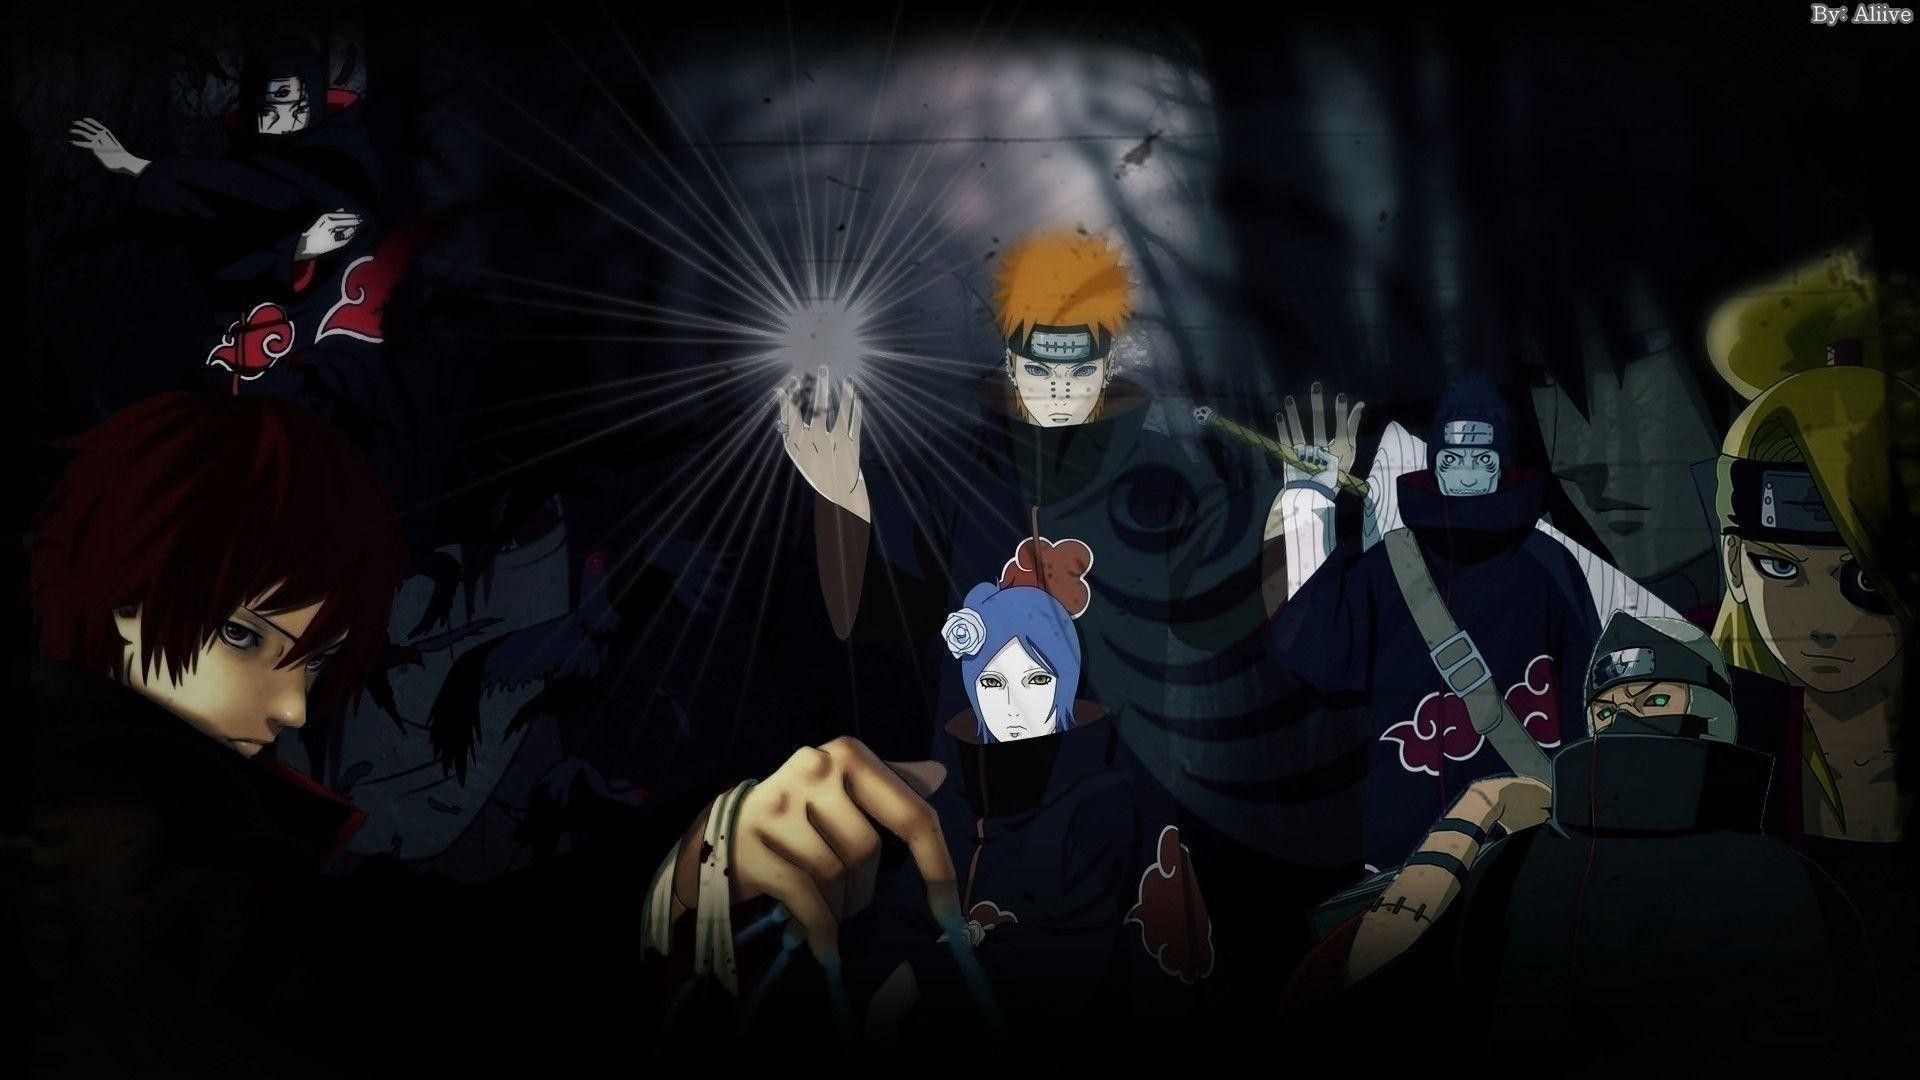 A group of anime characters in the dark - Naruto